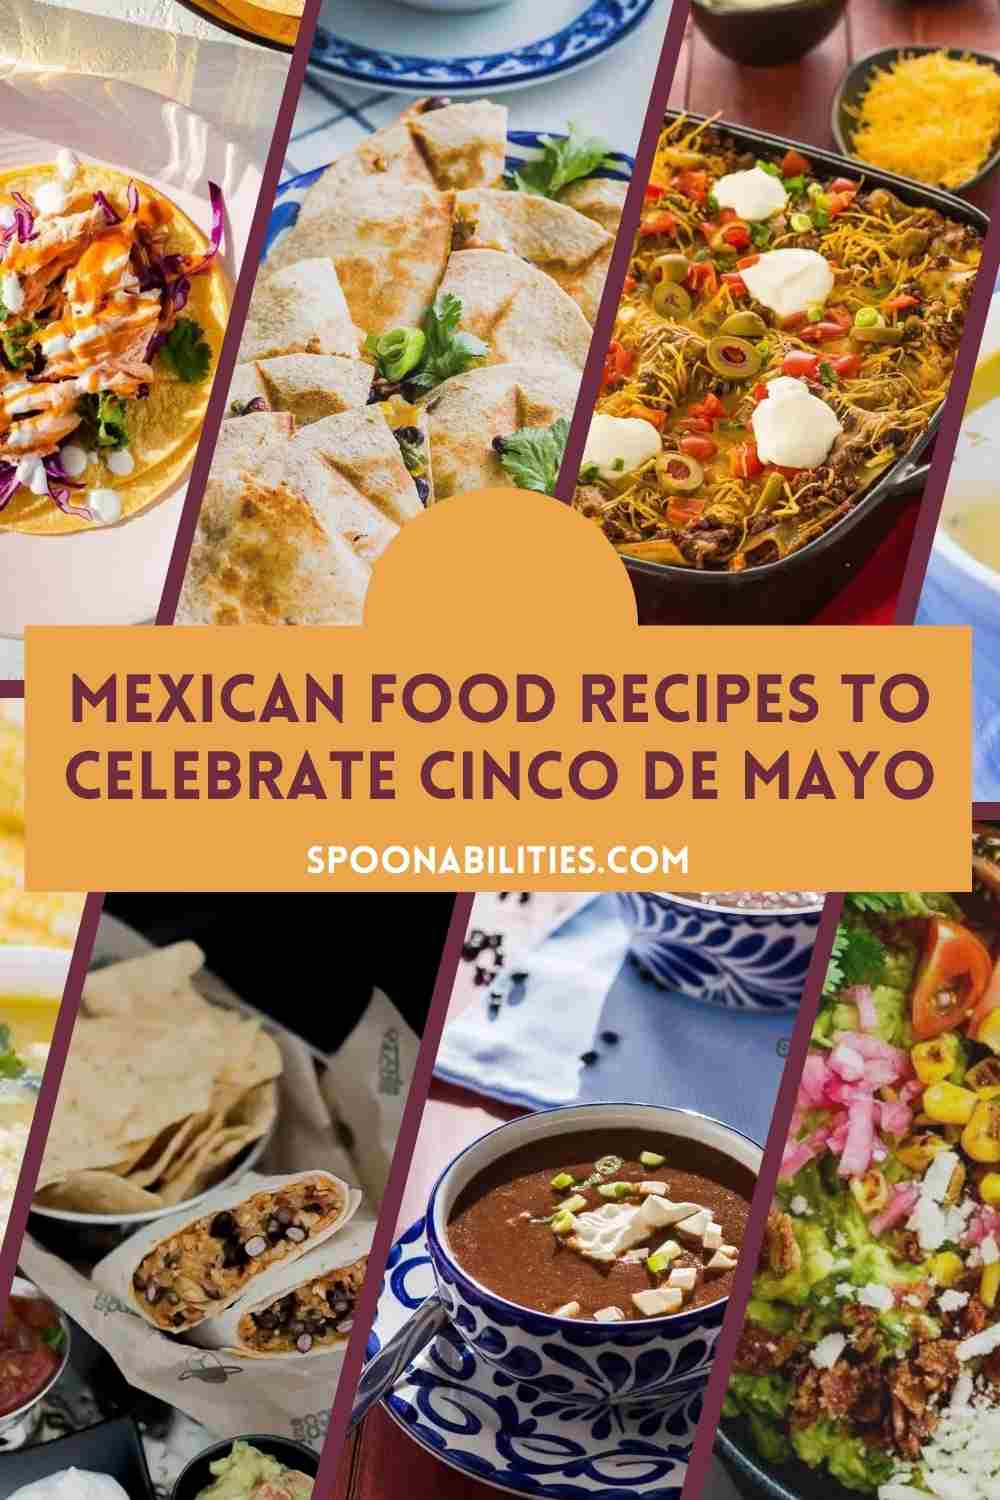 Our best Mexican recipes to enjoy the Cinco de Mayo. Check the post and recipes at Spoonabilities.com